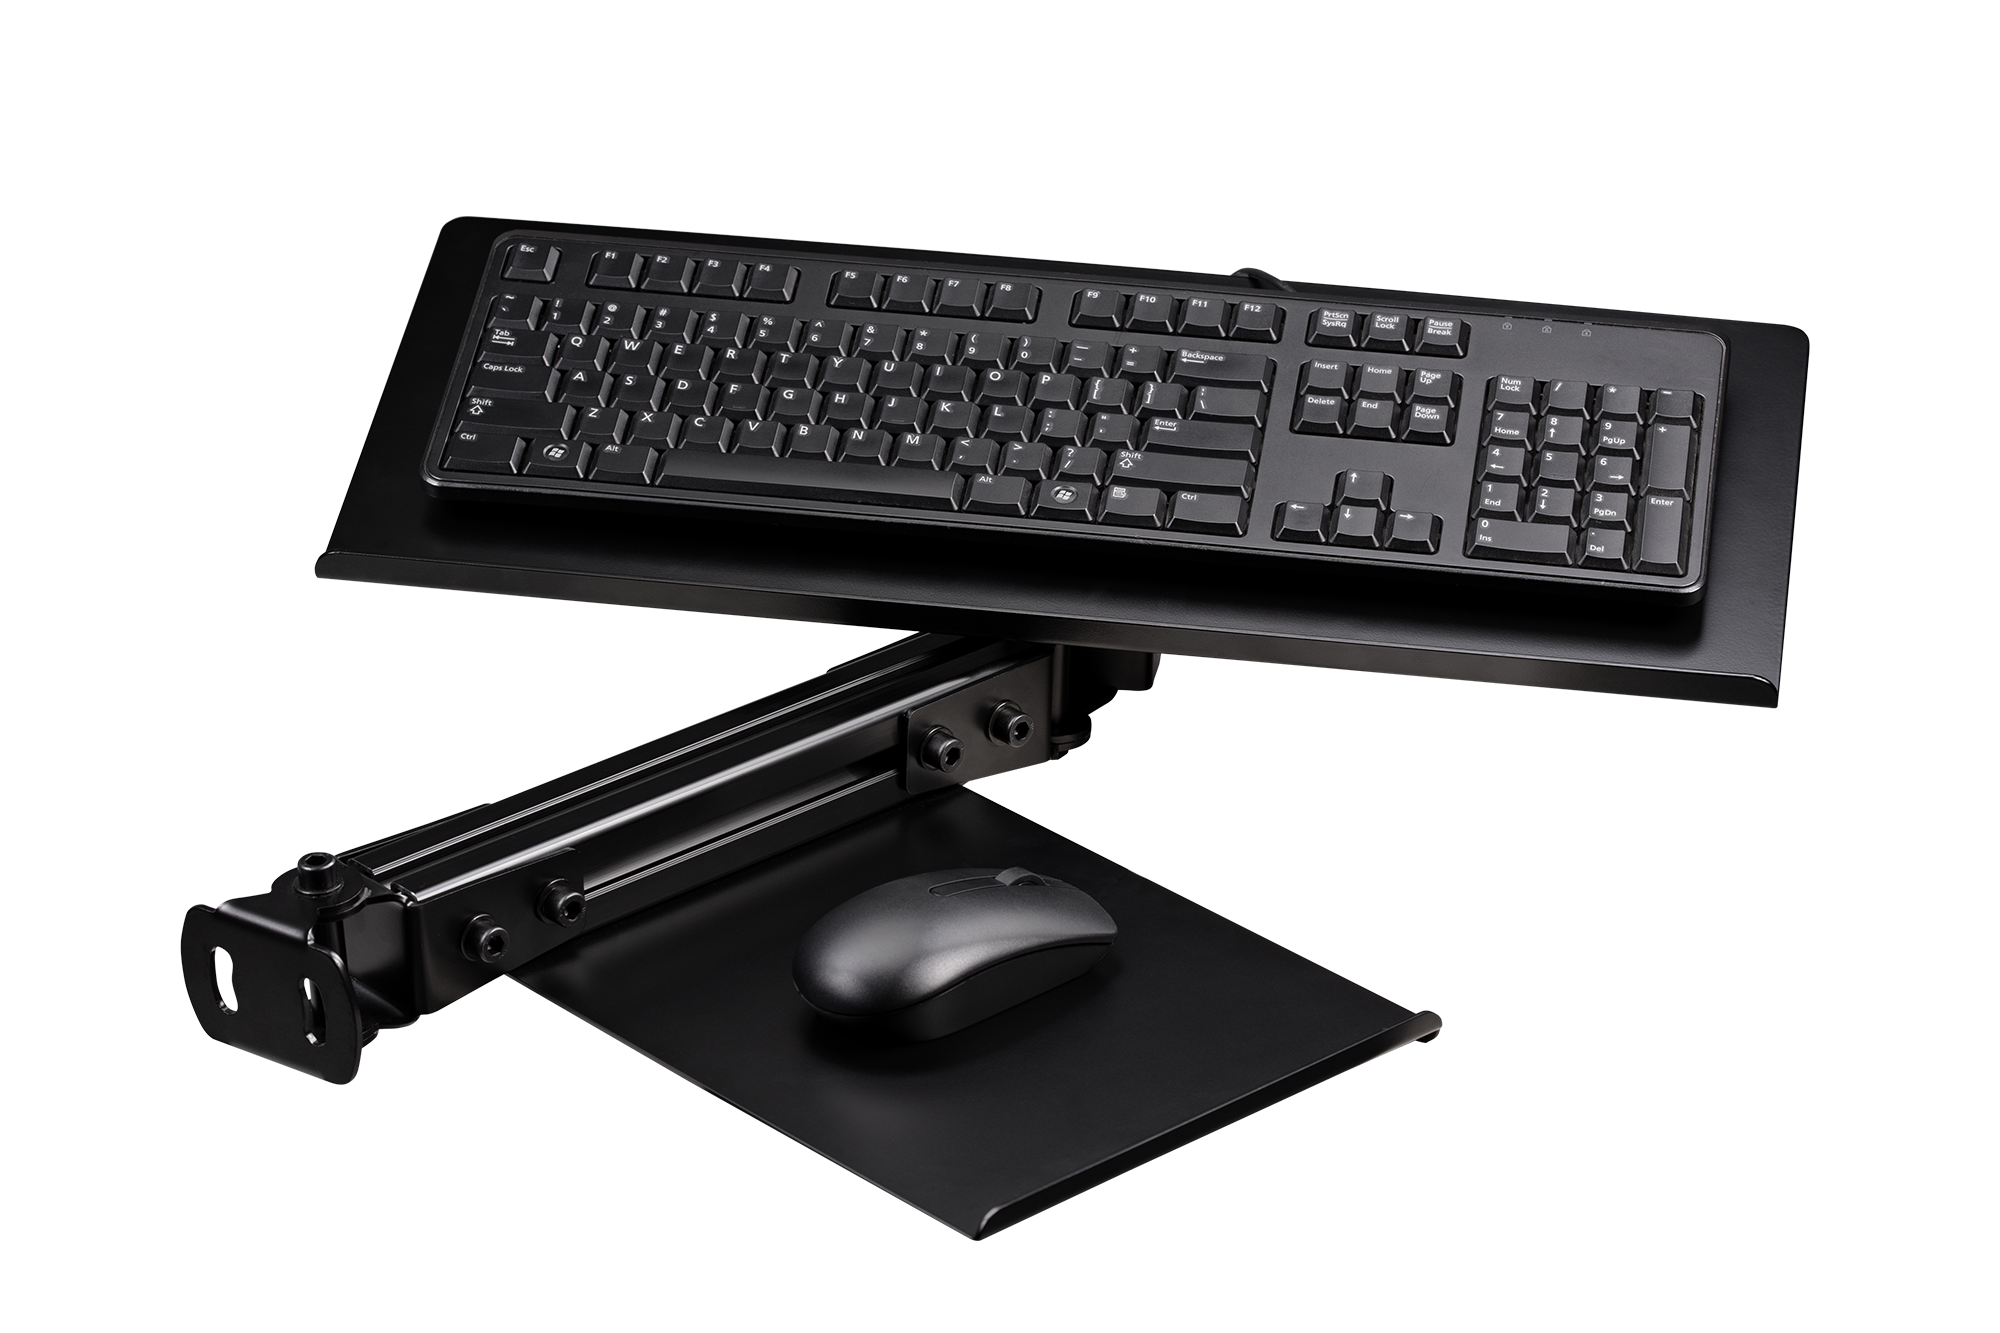 GTElite Keyboard and Mouse Tray - Svart